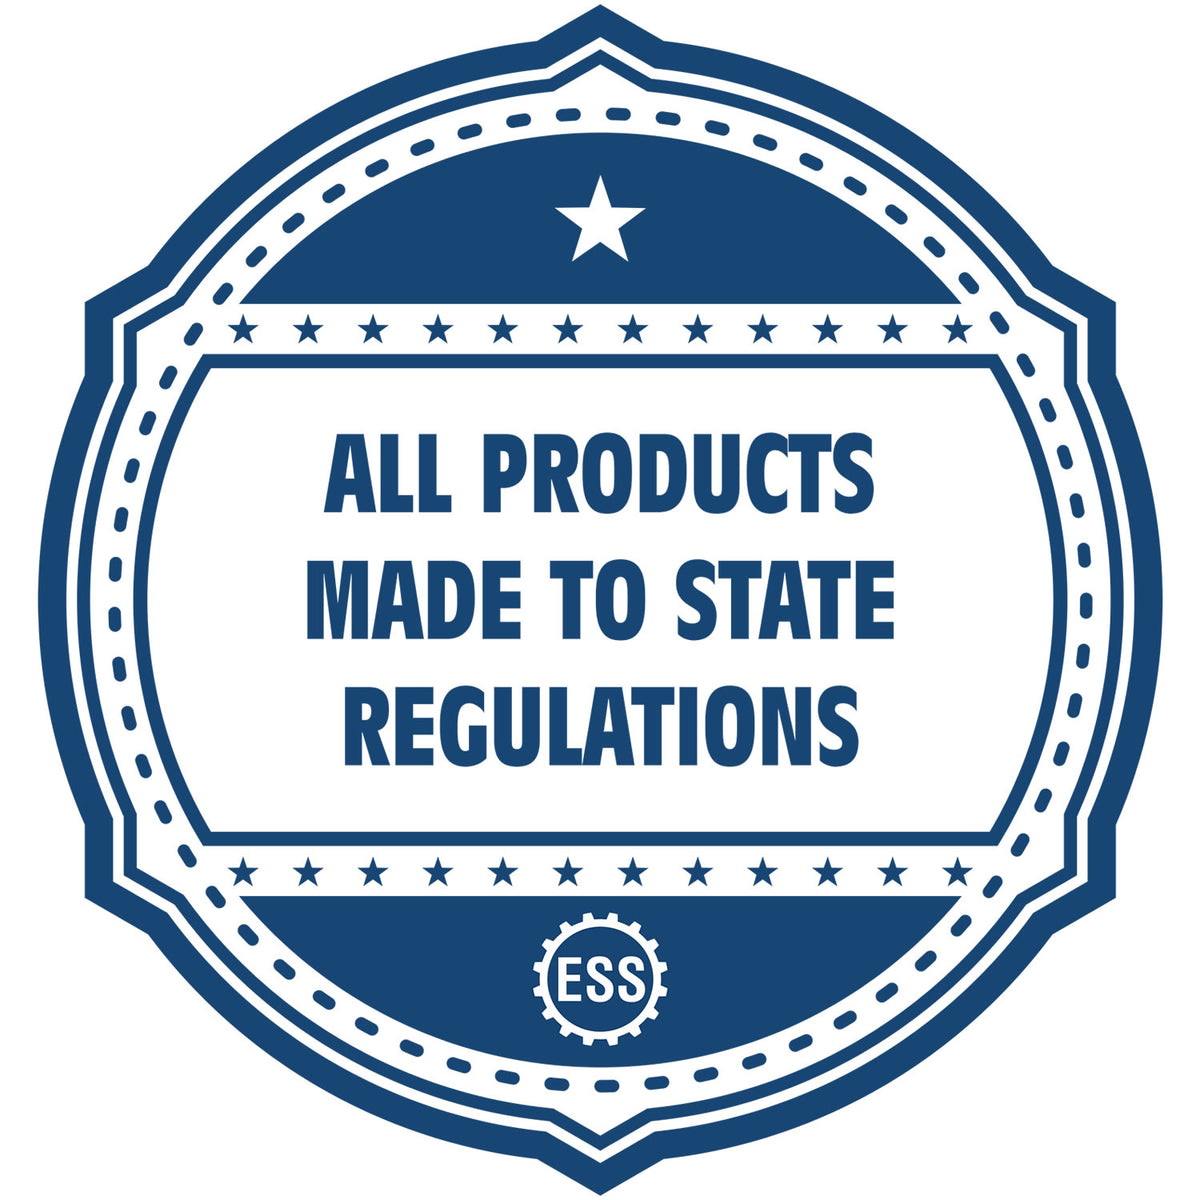 An icon or badge element for the State of Pennsylvania Soft Land Surveyor Embossing Seal showing that this product is made in compliance with state regulations.